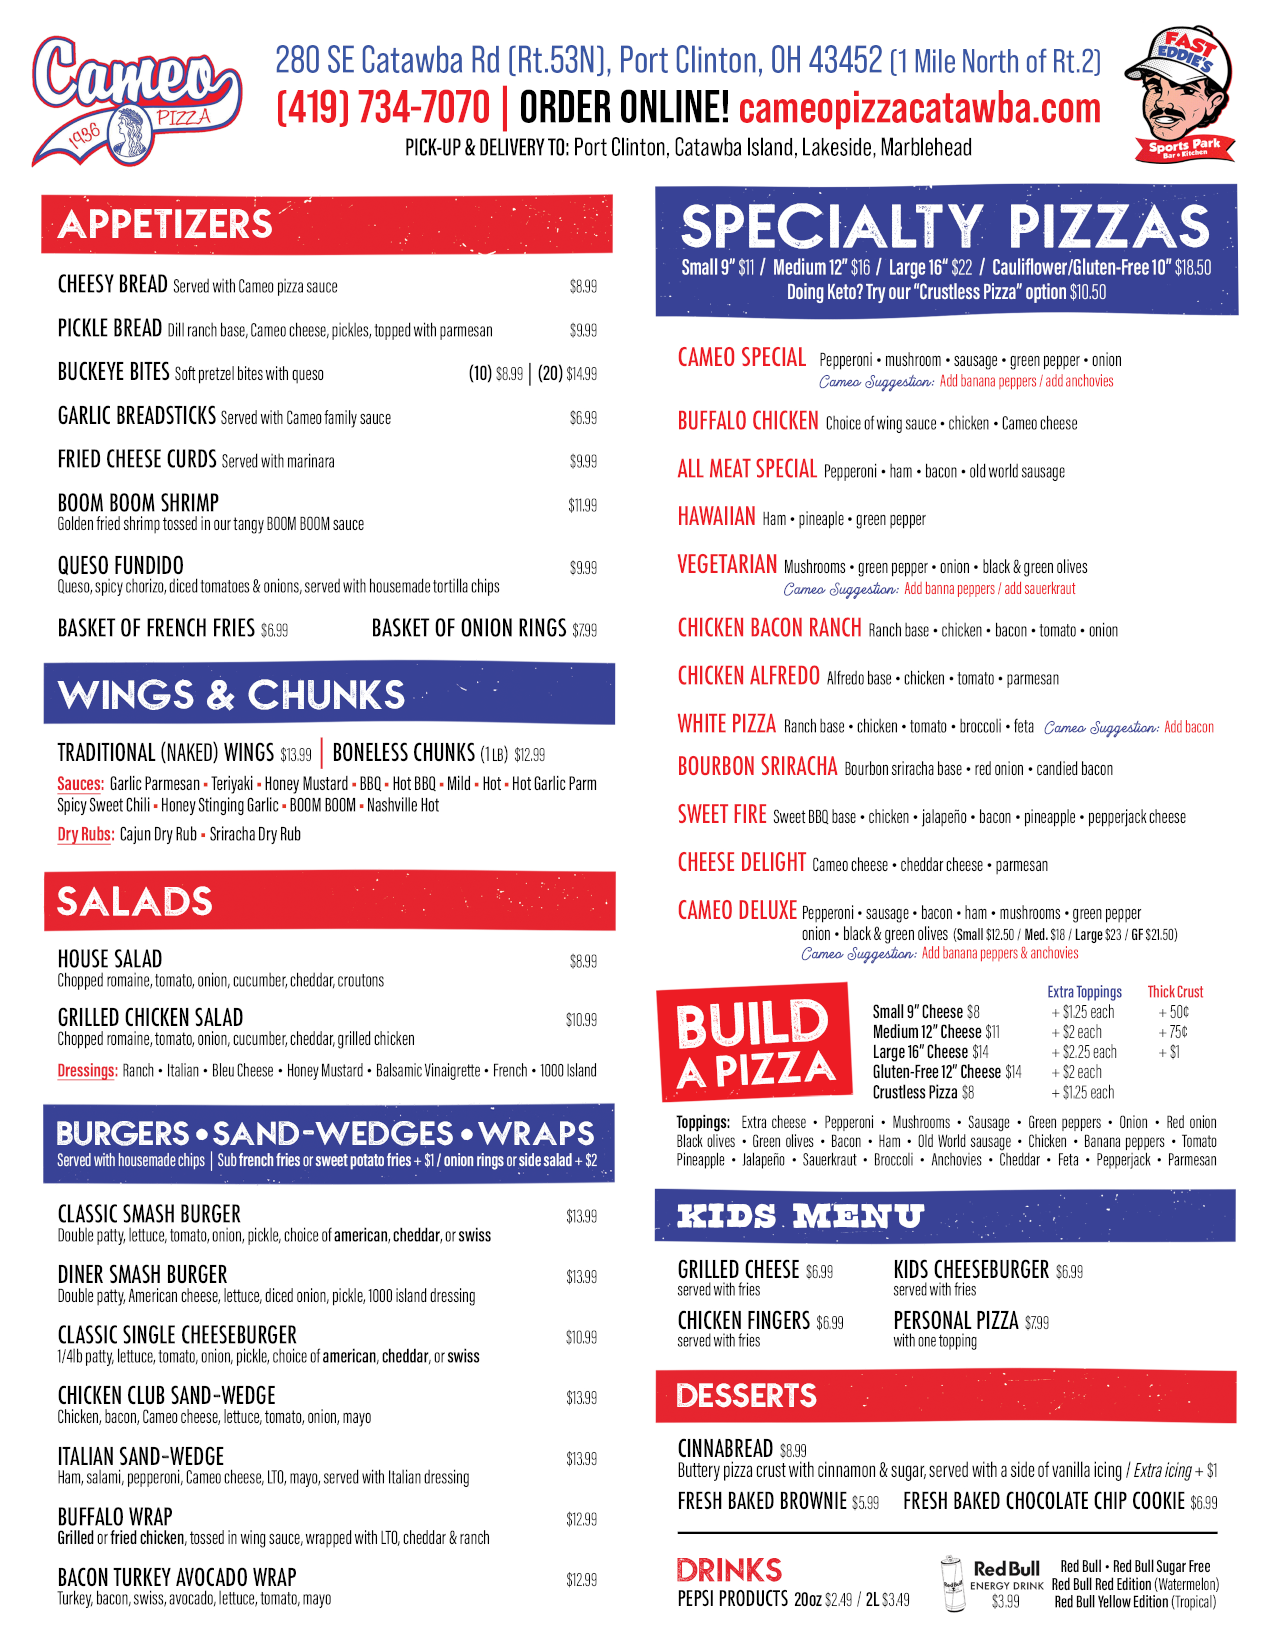 Cameo's Delivery/Carry-Out Pizza Menu - Catawba/Port Clinton, Ohio